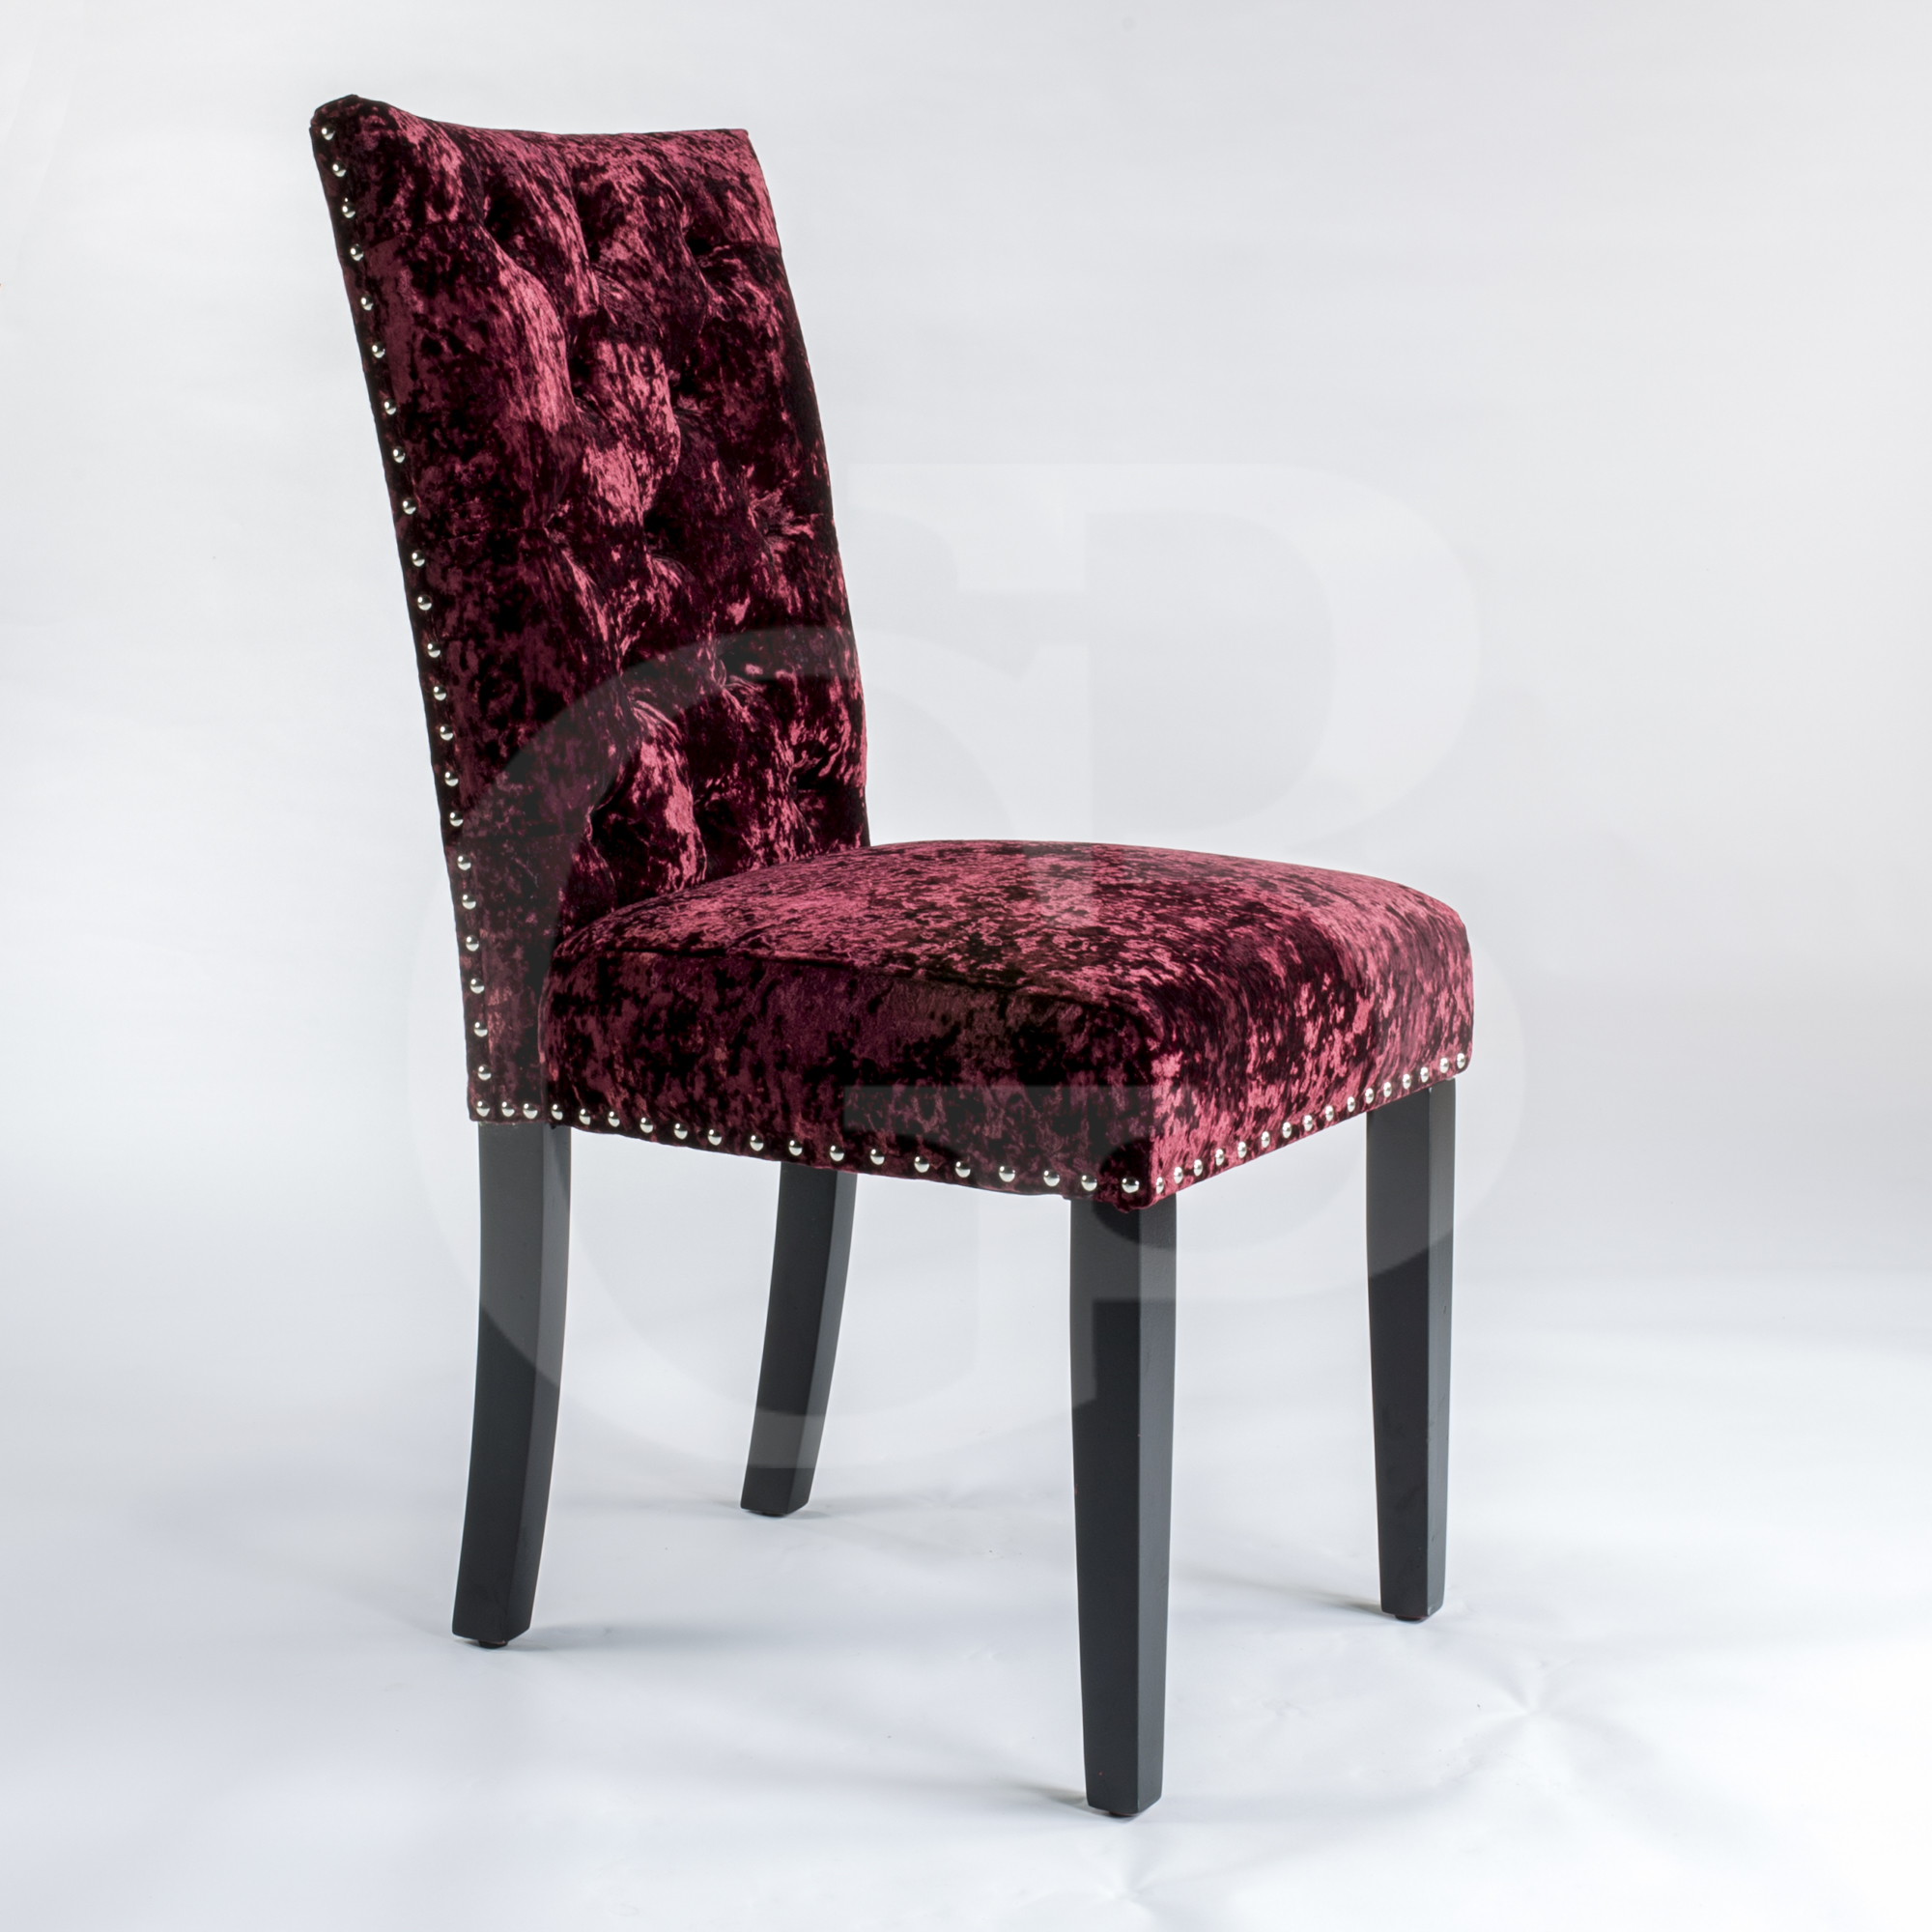 Crushed Velvet Dining Chairs With Knockers - Pair of Black Crushed